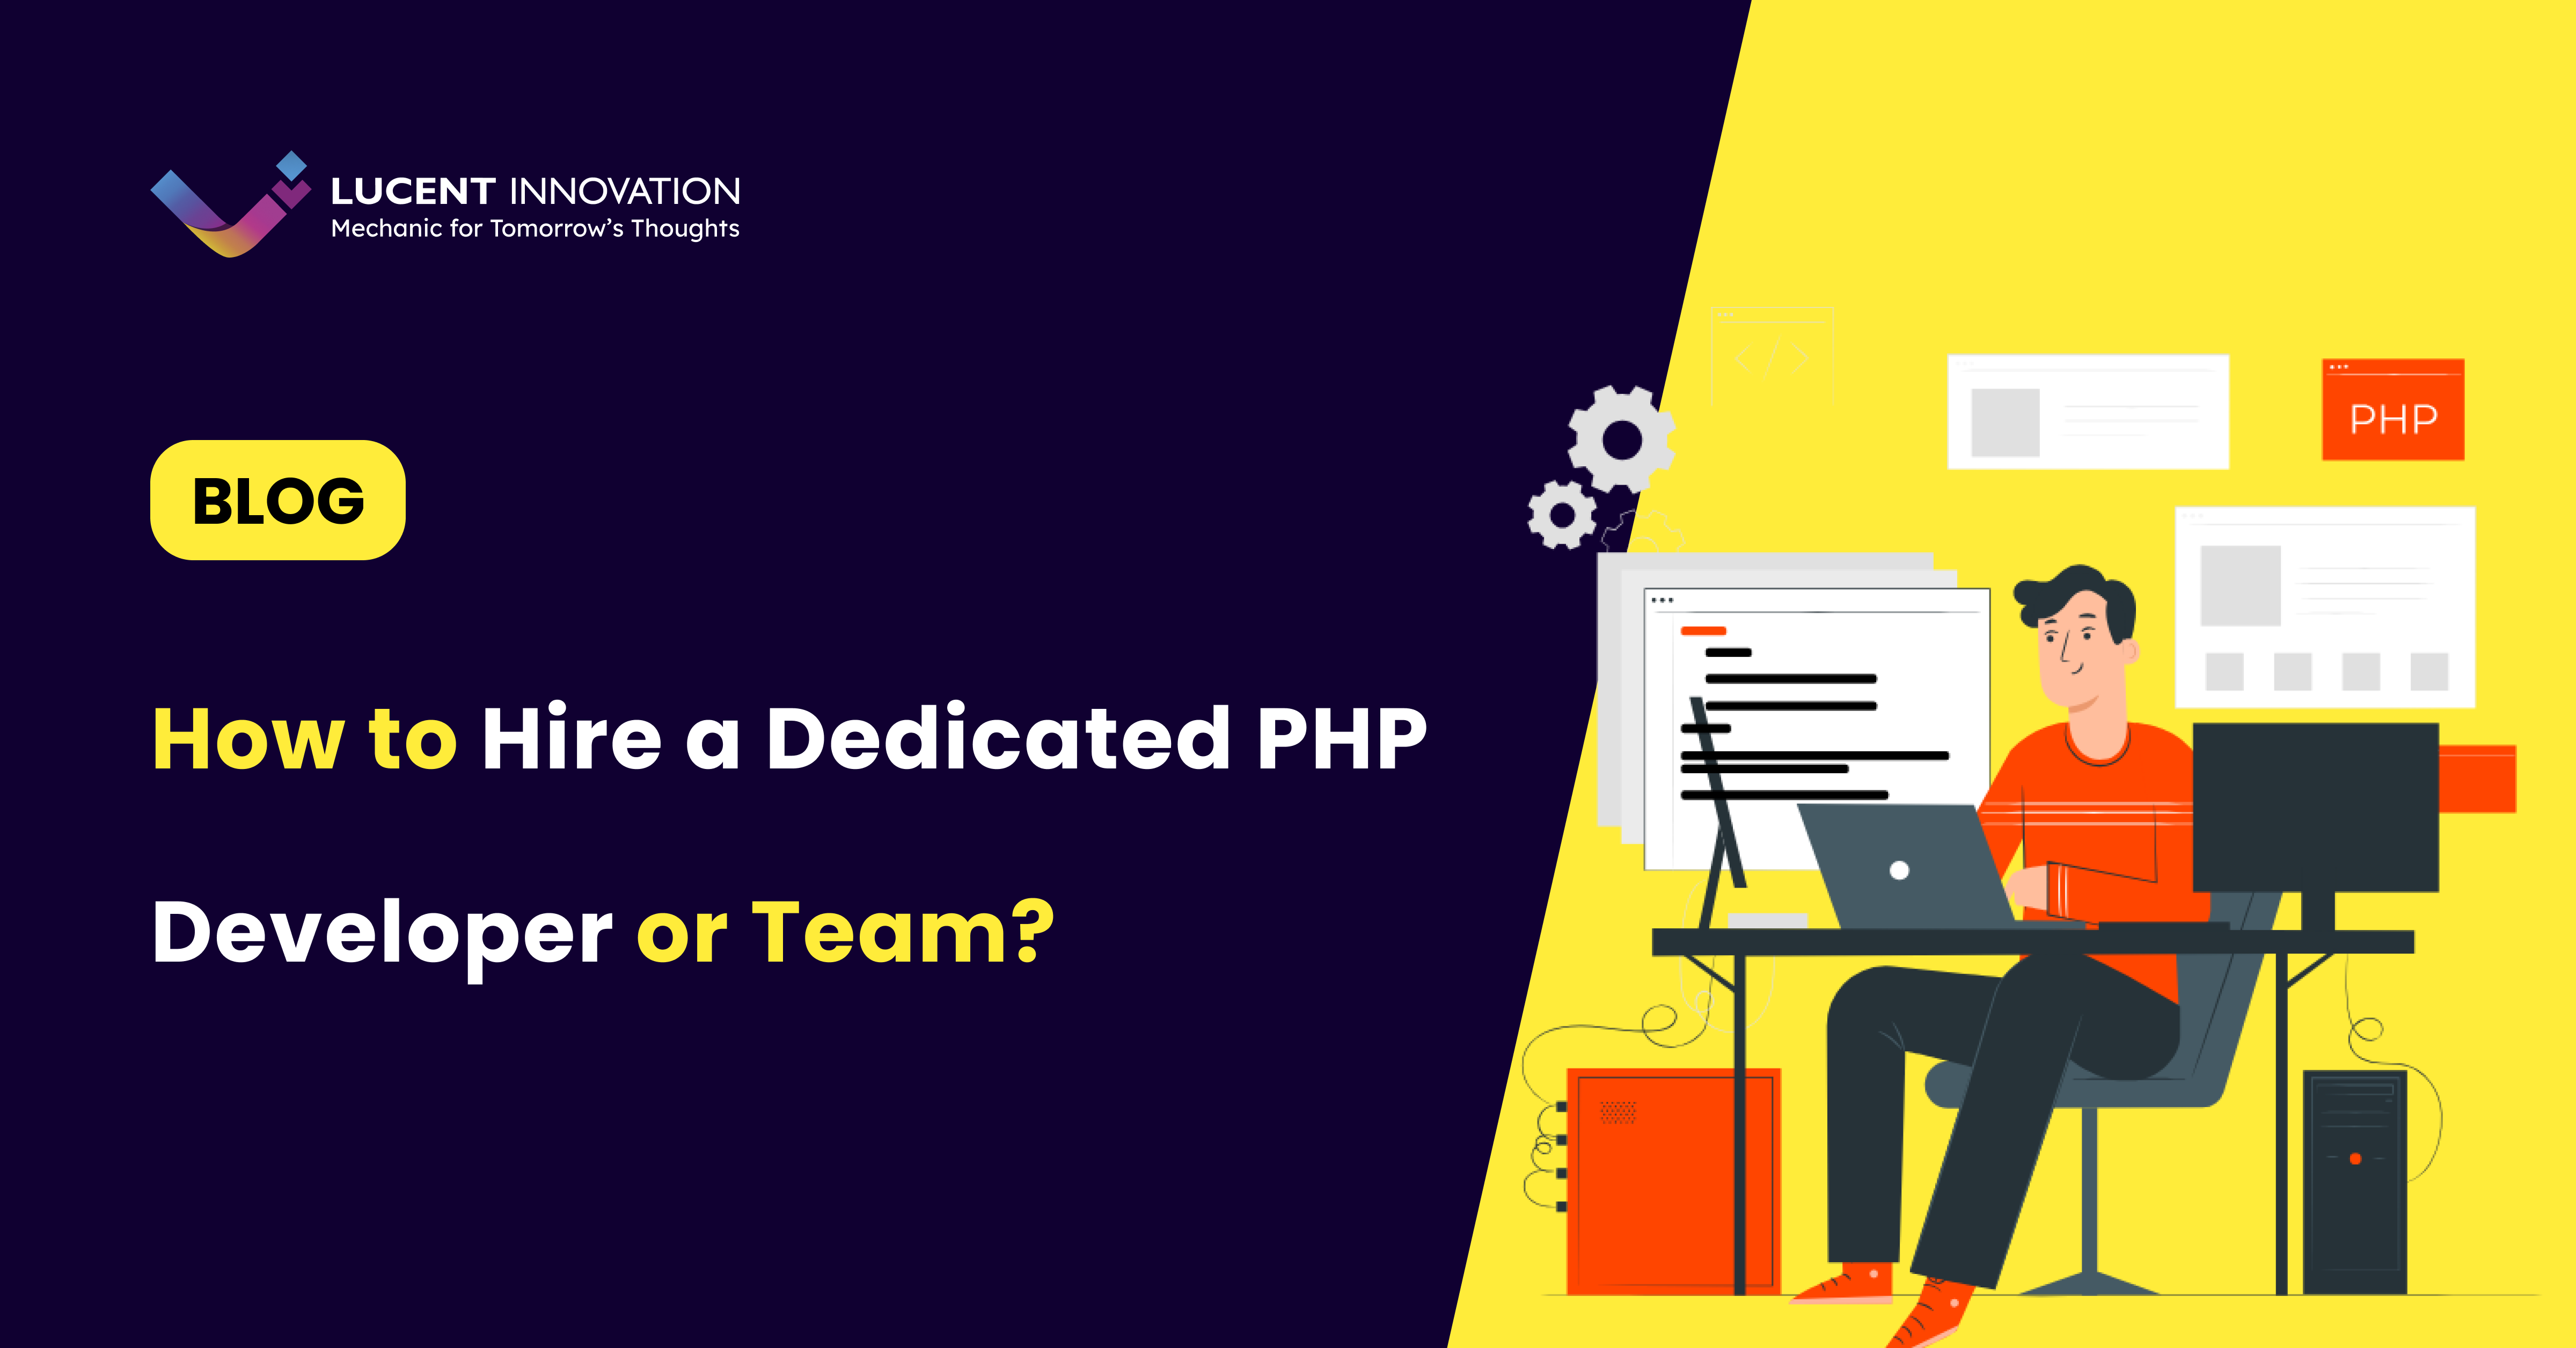 How To Hire a Dedicated PHP Developer or Team?